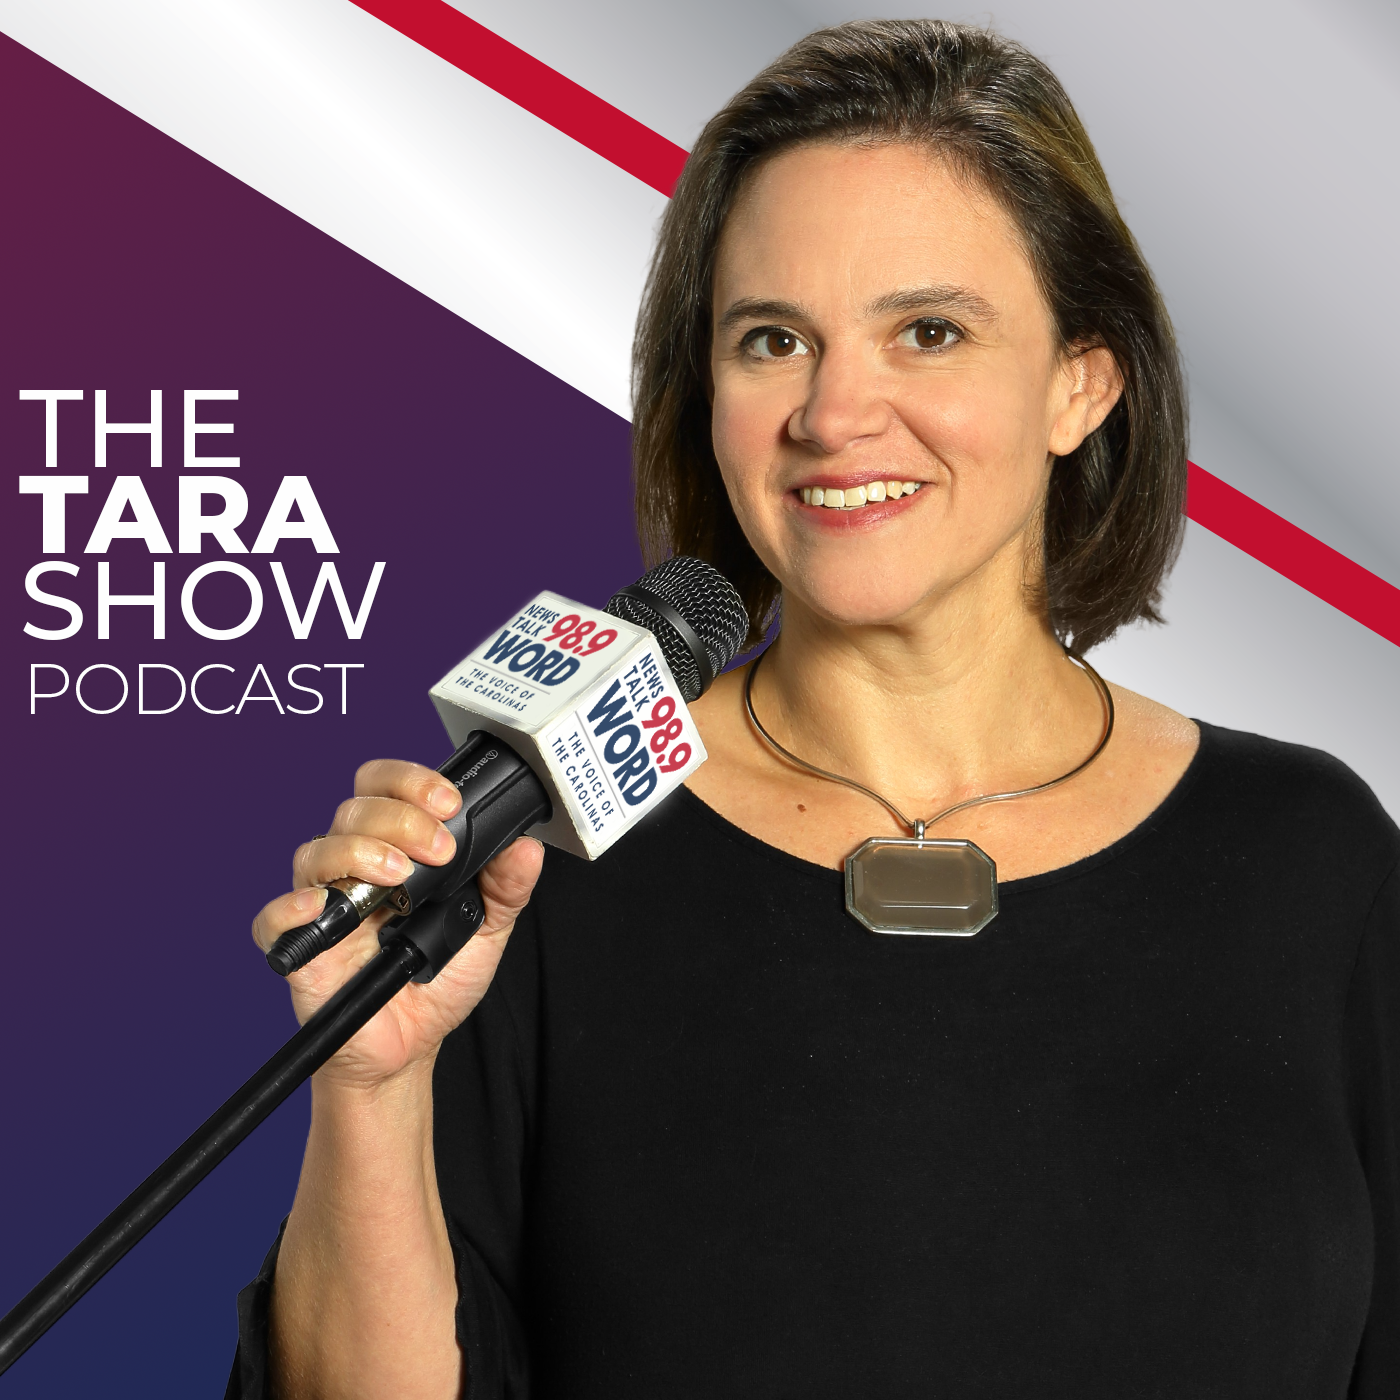 Hour 3: The Tara Show - “Liberal Violence Towards Jewish People” “Venezuelan Loyalism” “A Climate Emergency” “Jewish Hate on the Left”